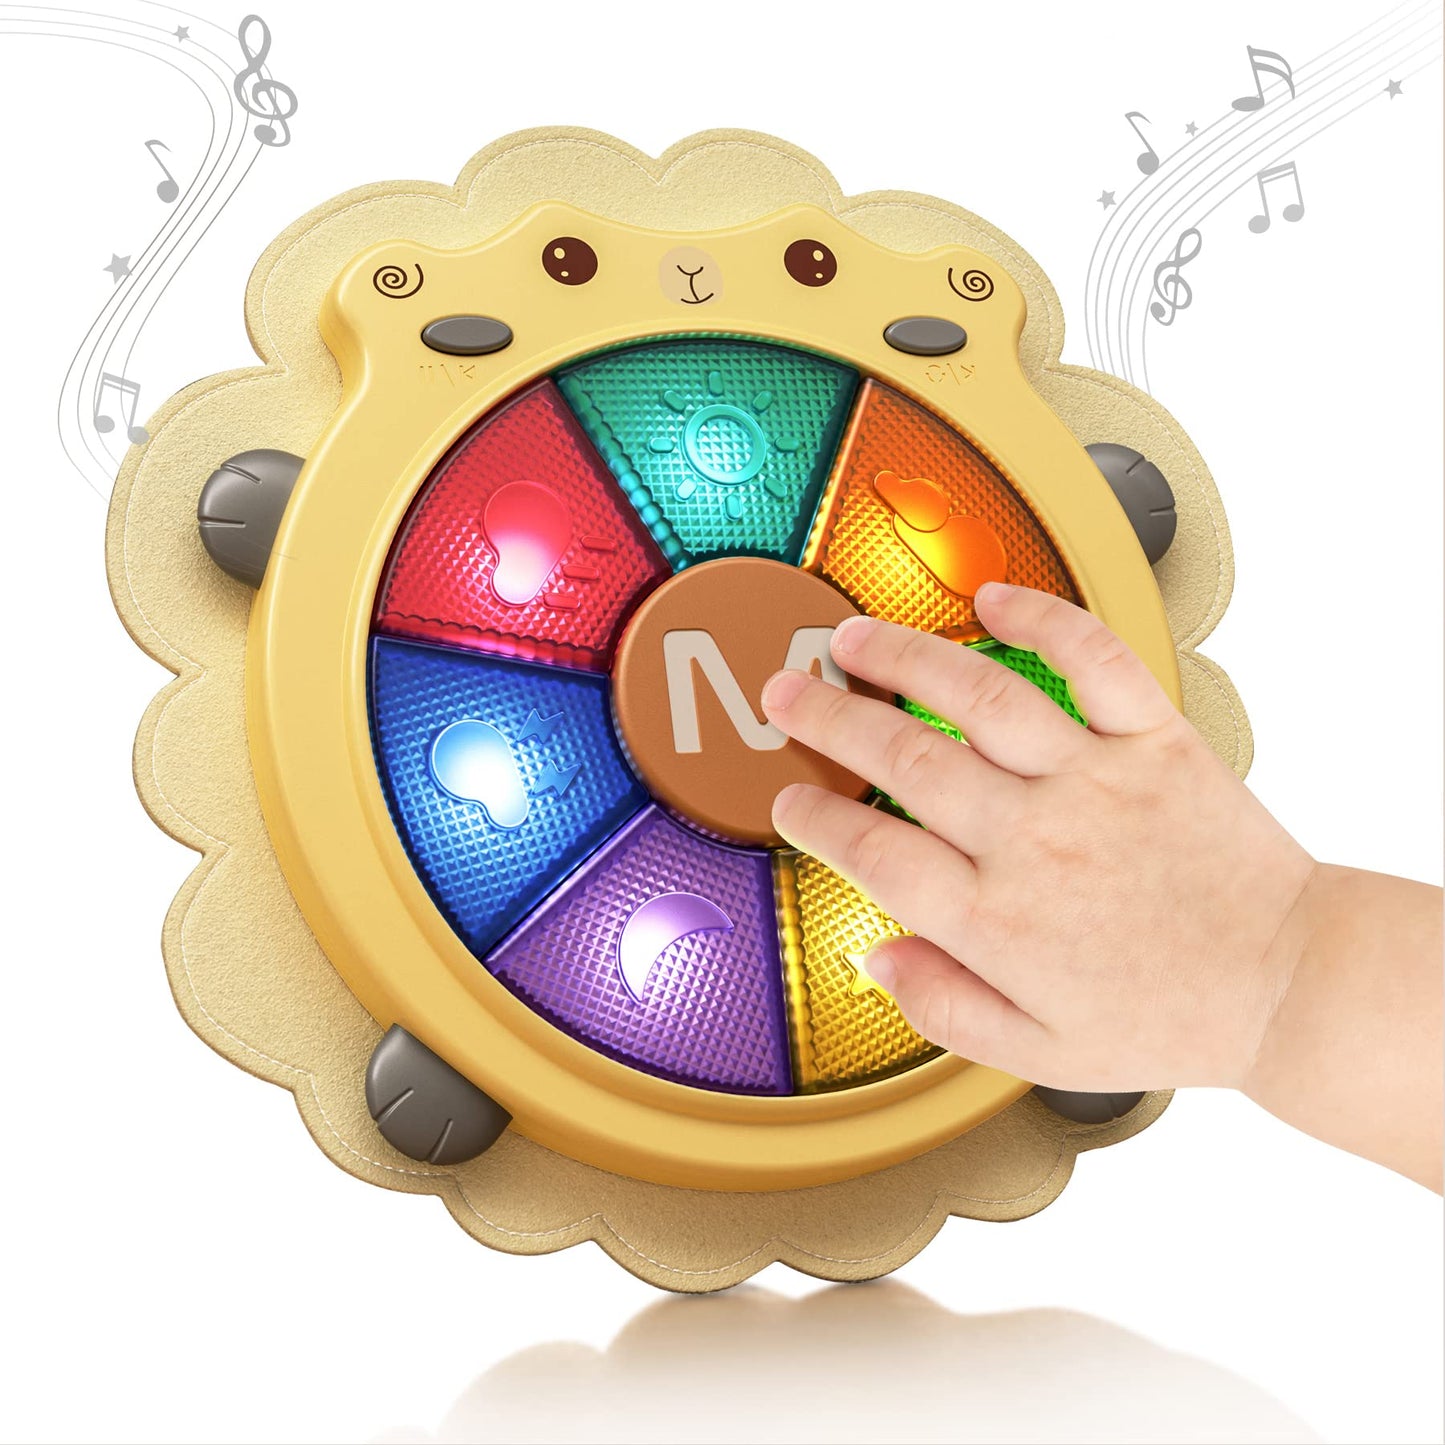 TUMAMA Baby Musical Drum Toy,Light Up Toys with Sound and Light,Musical Instrument Game,Sensory Activity Toys Learning Educational Kid Toy ,Christmas Birthday Gift for Toddler 18 Months+,Sheep